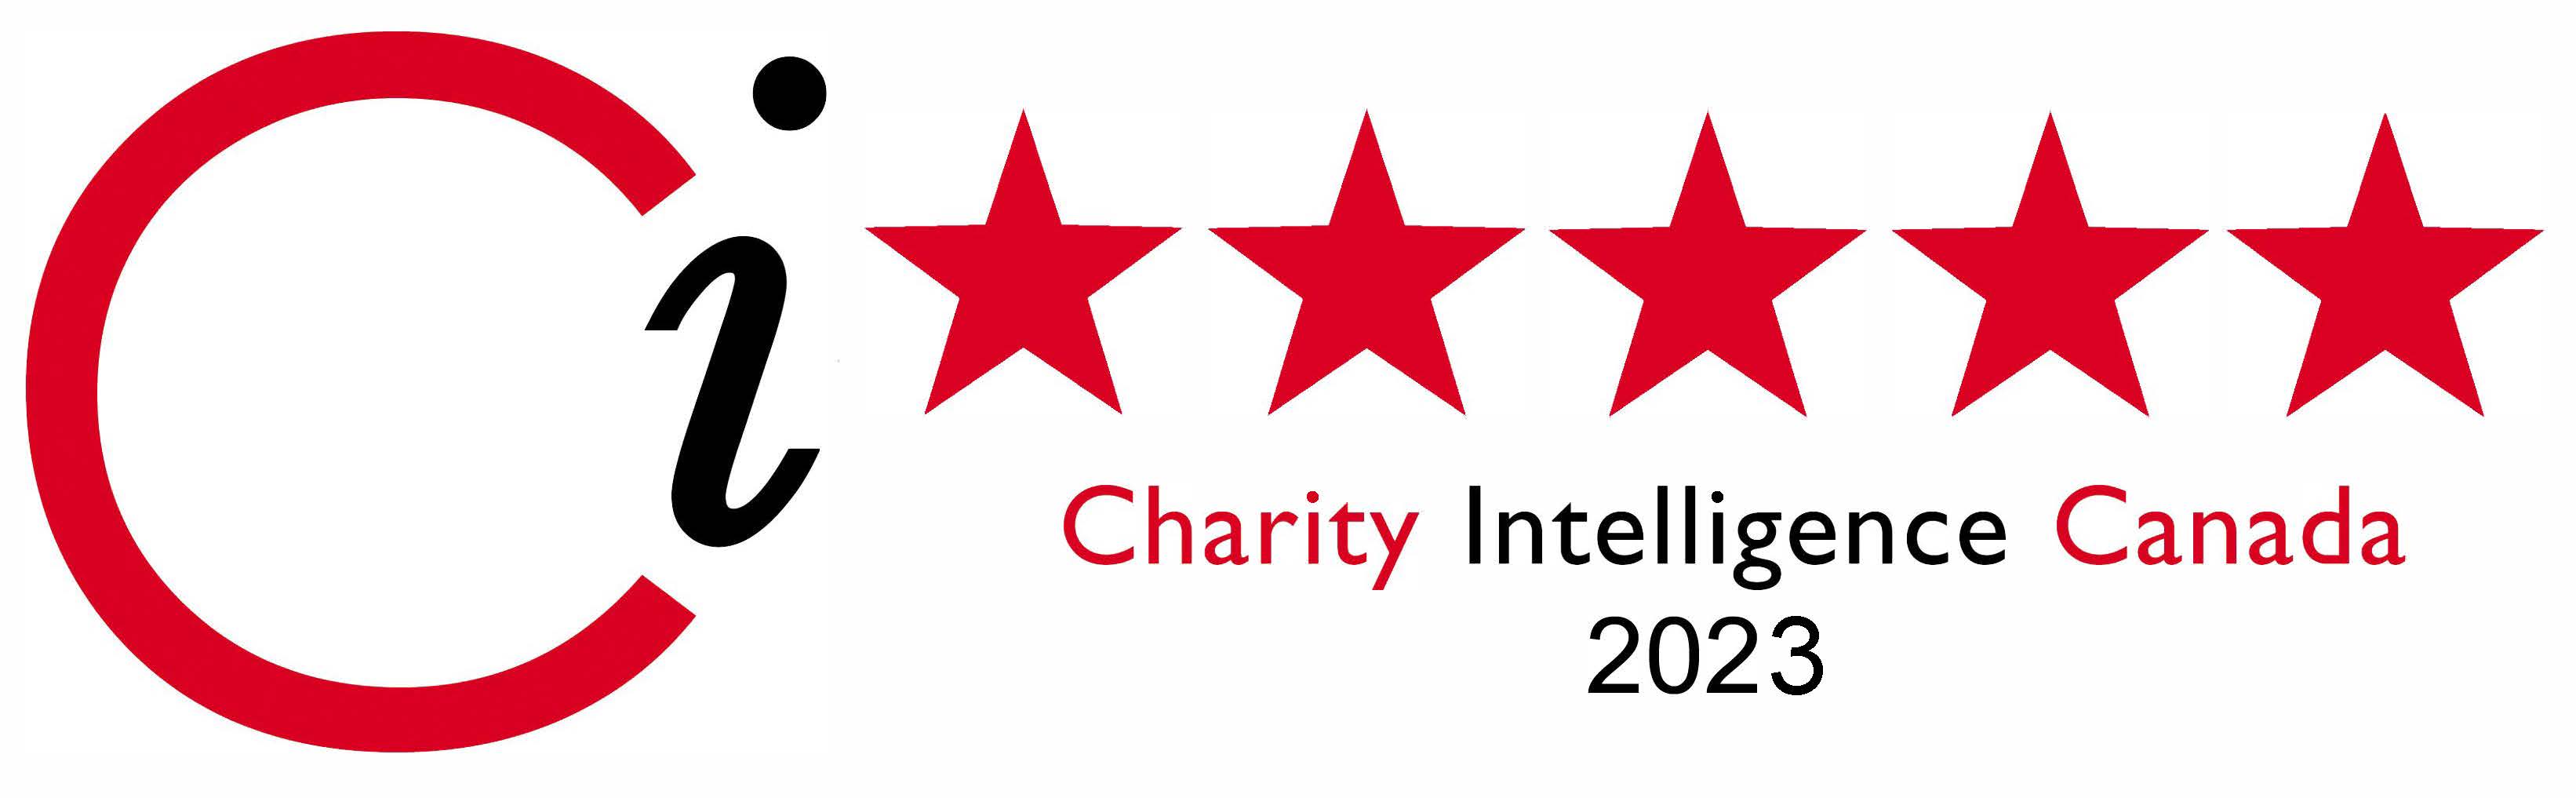 Charity Intelligence Canada 5-star rating